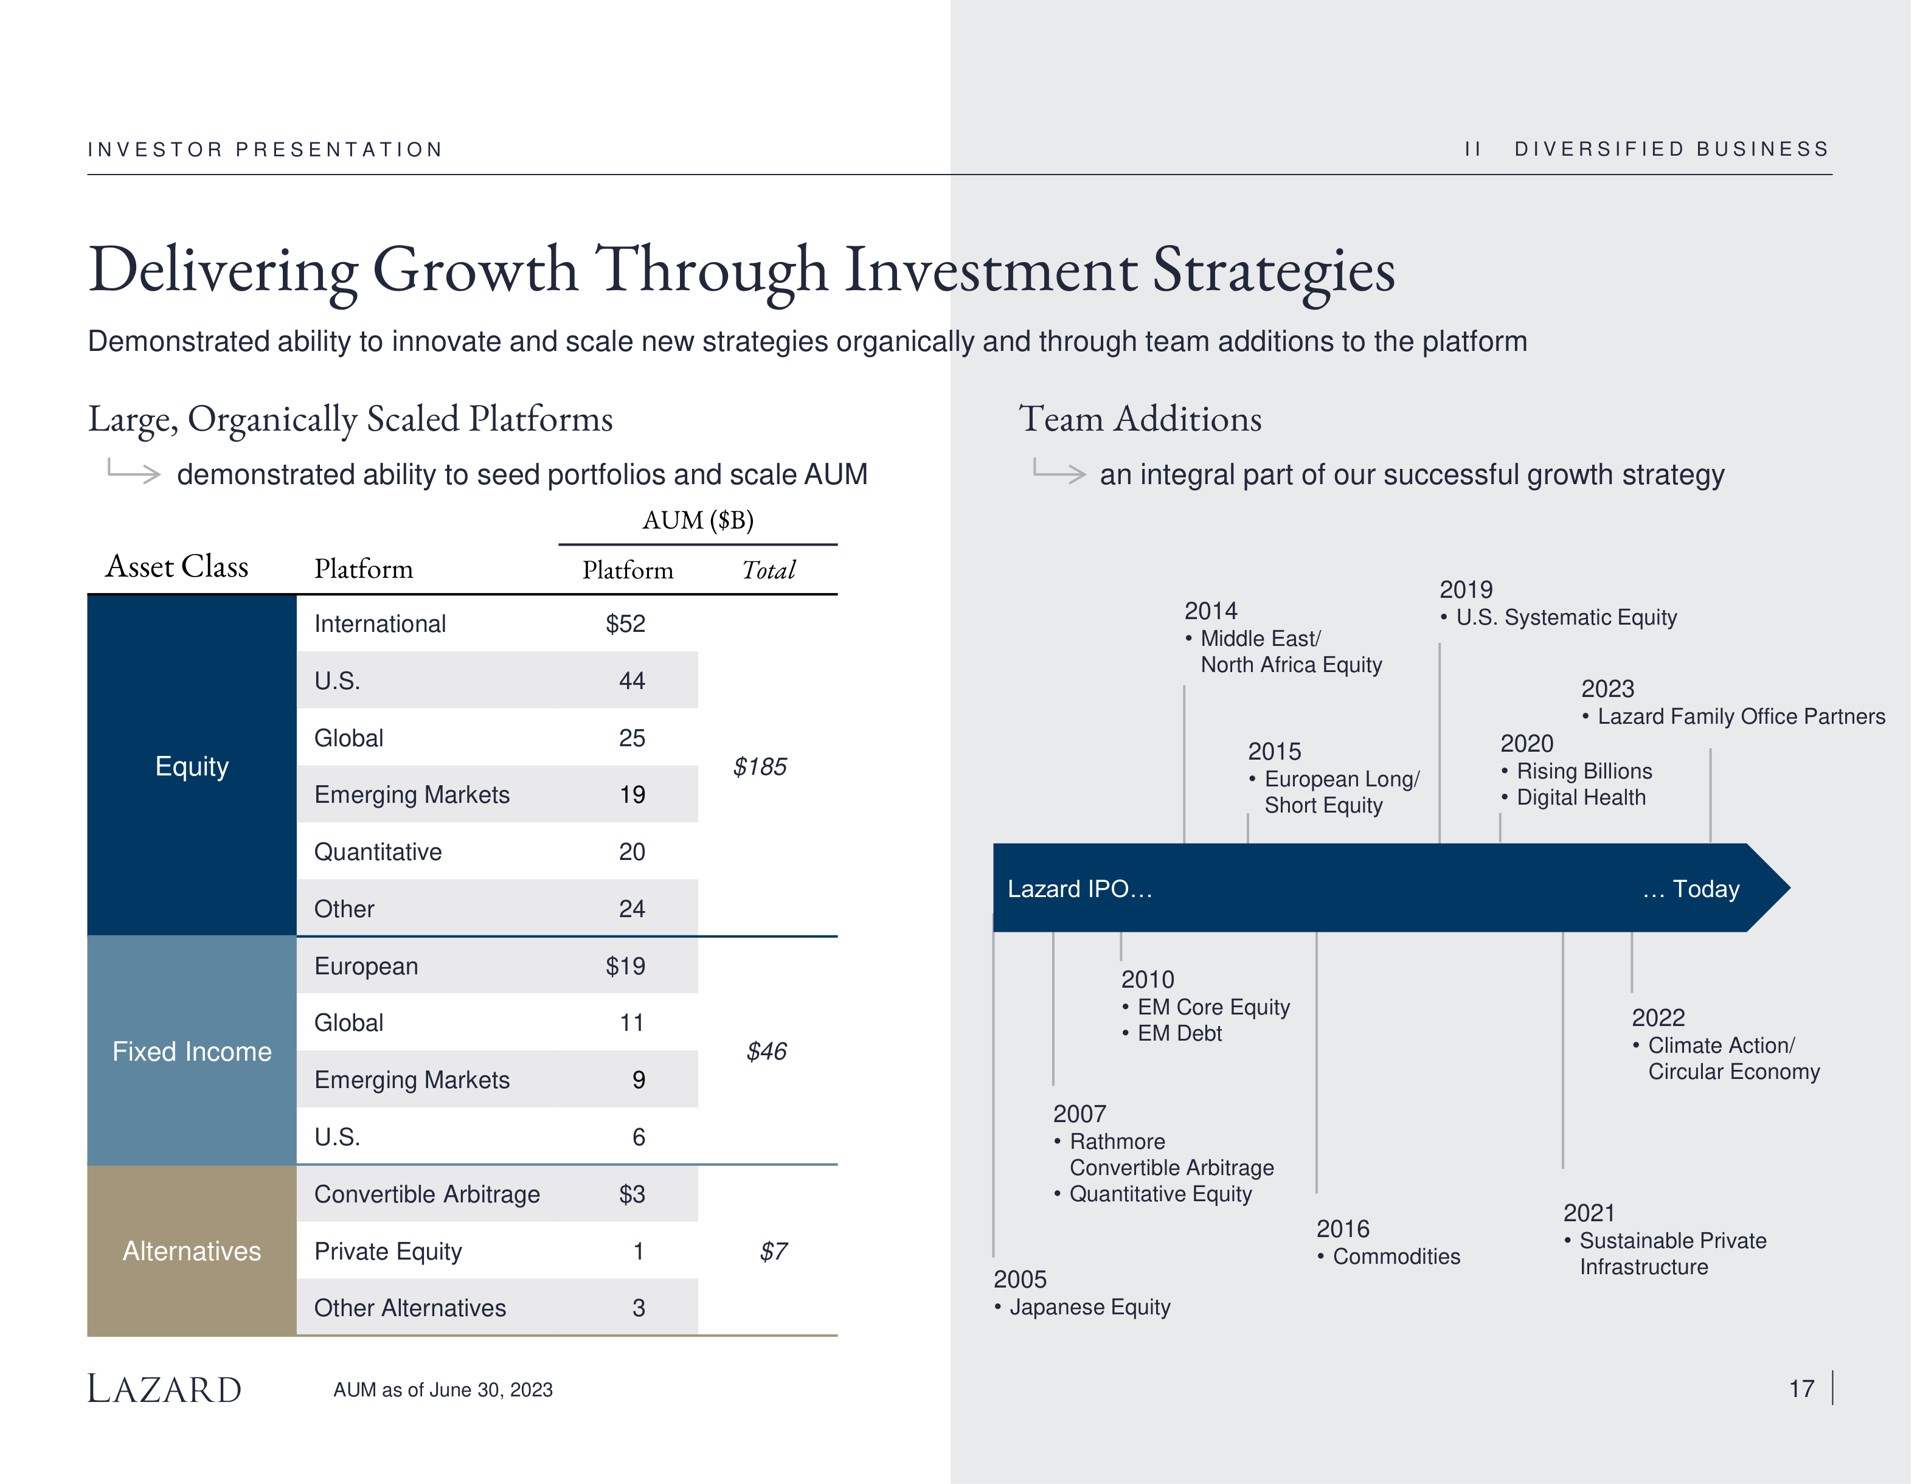 delivering growth through investment strategies large organically scaled platforms team additions asset class platform platform total | Lazard